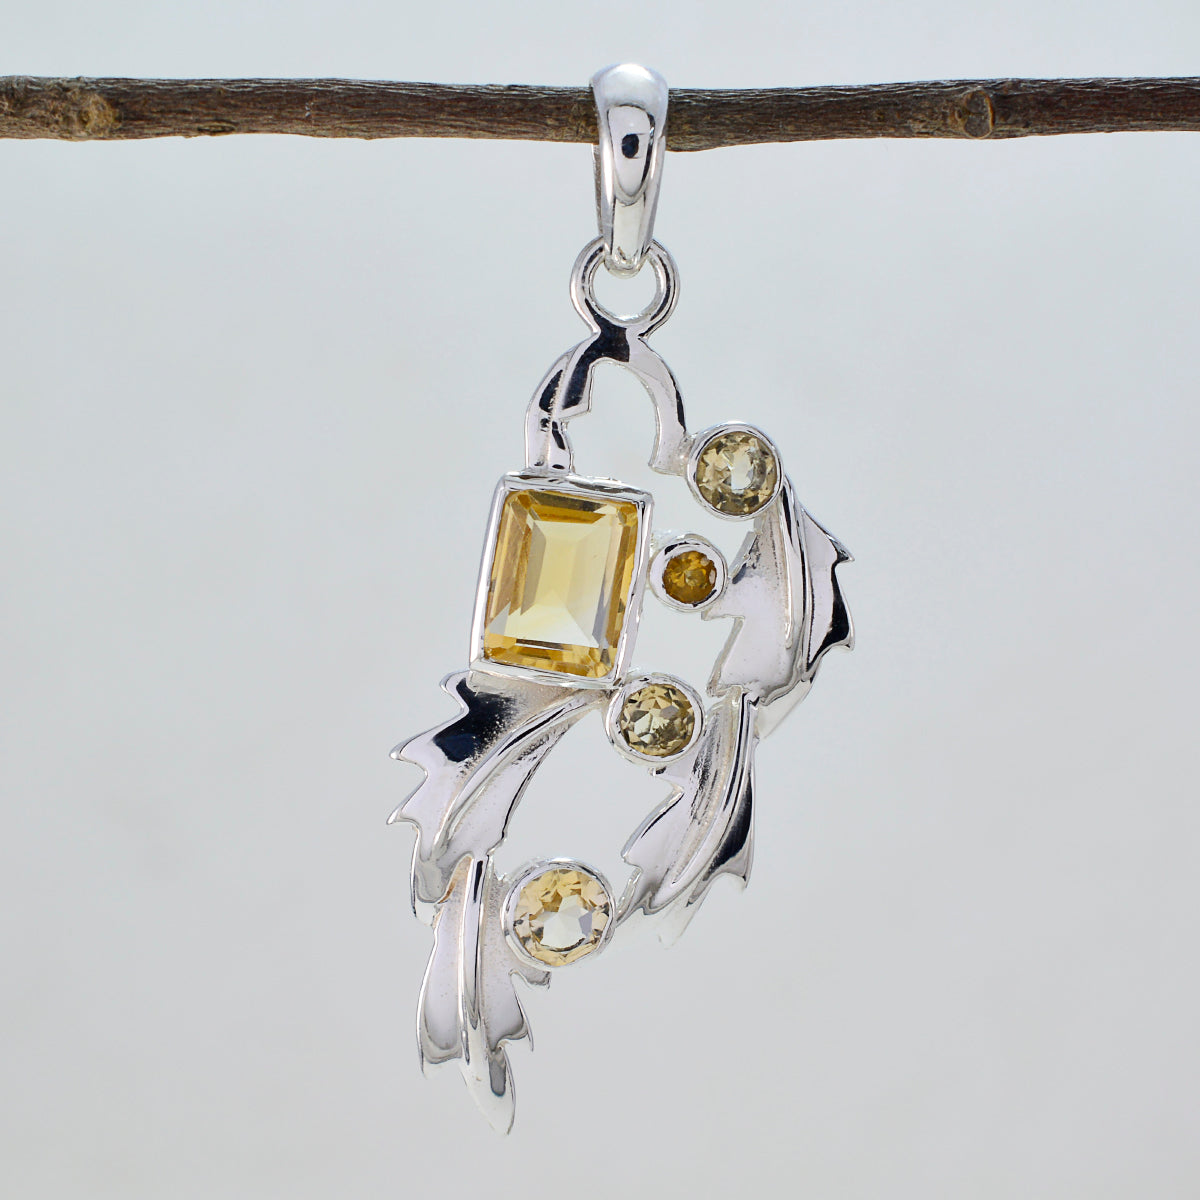 Riyo Charming Gems Multi Faceted Yellow Citrine Silver Pendant Gift For Boxing Day